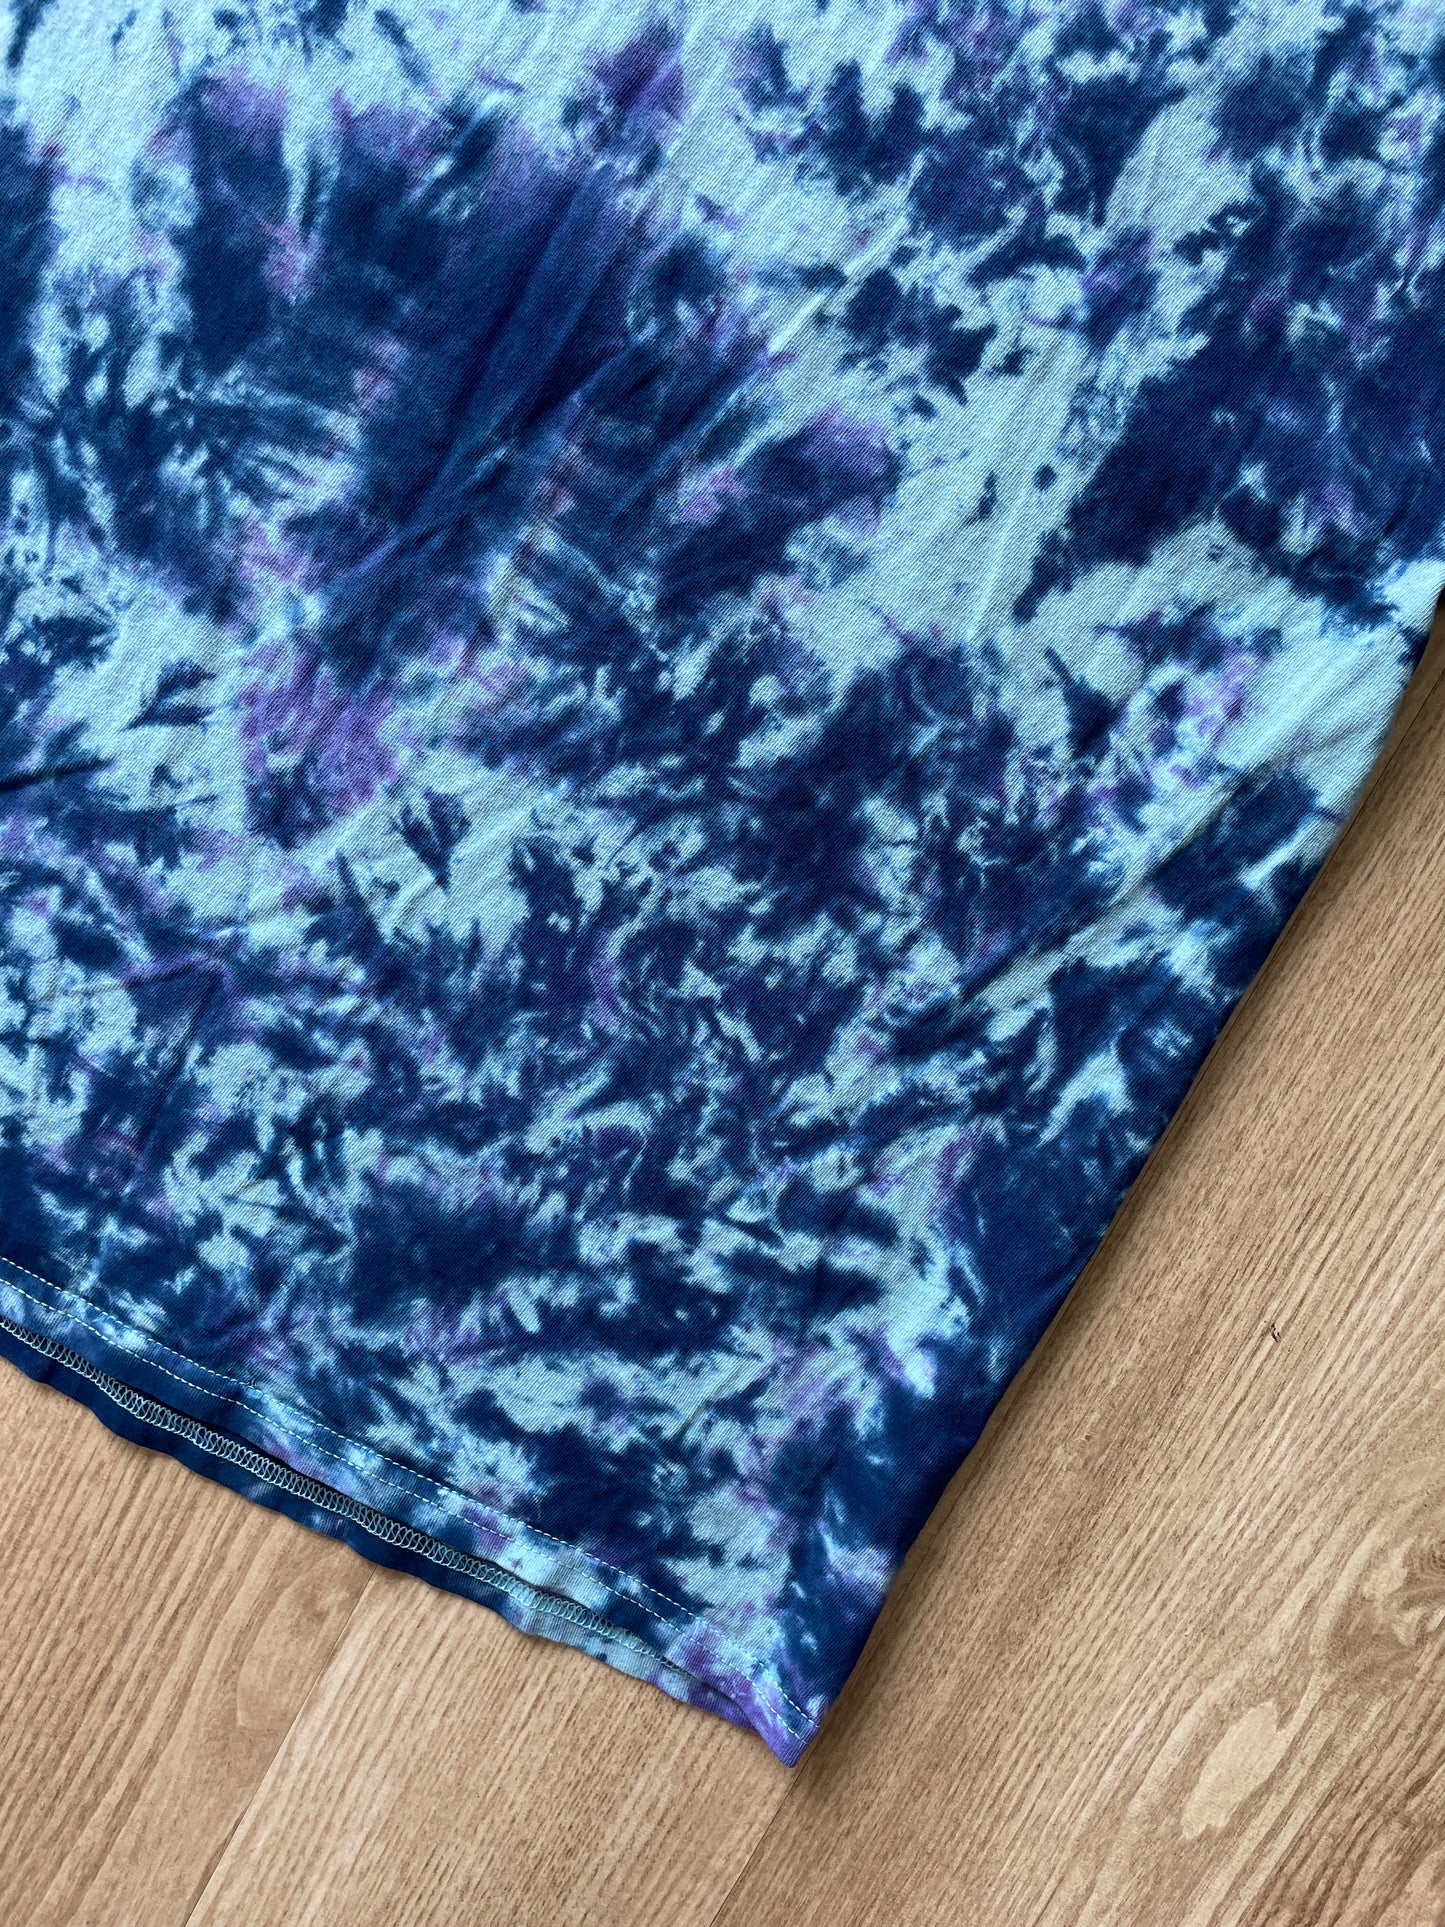 XL Men’s Climbing Shoe Tie Dye T-Shirt | One-Of-a-Kind Blue and Purple Crumpled Short Sleeve